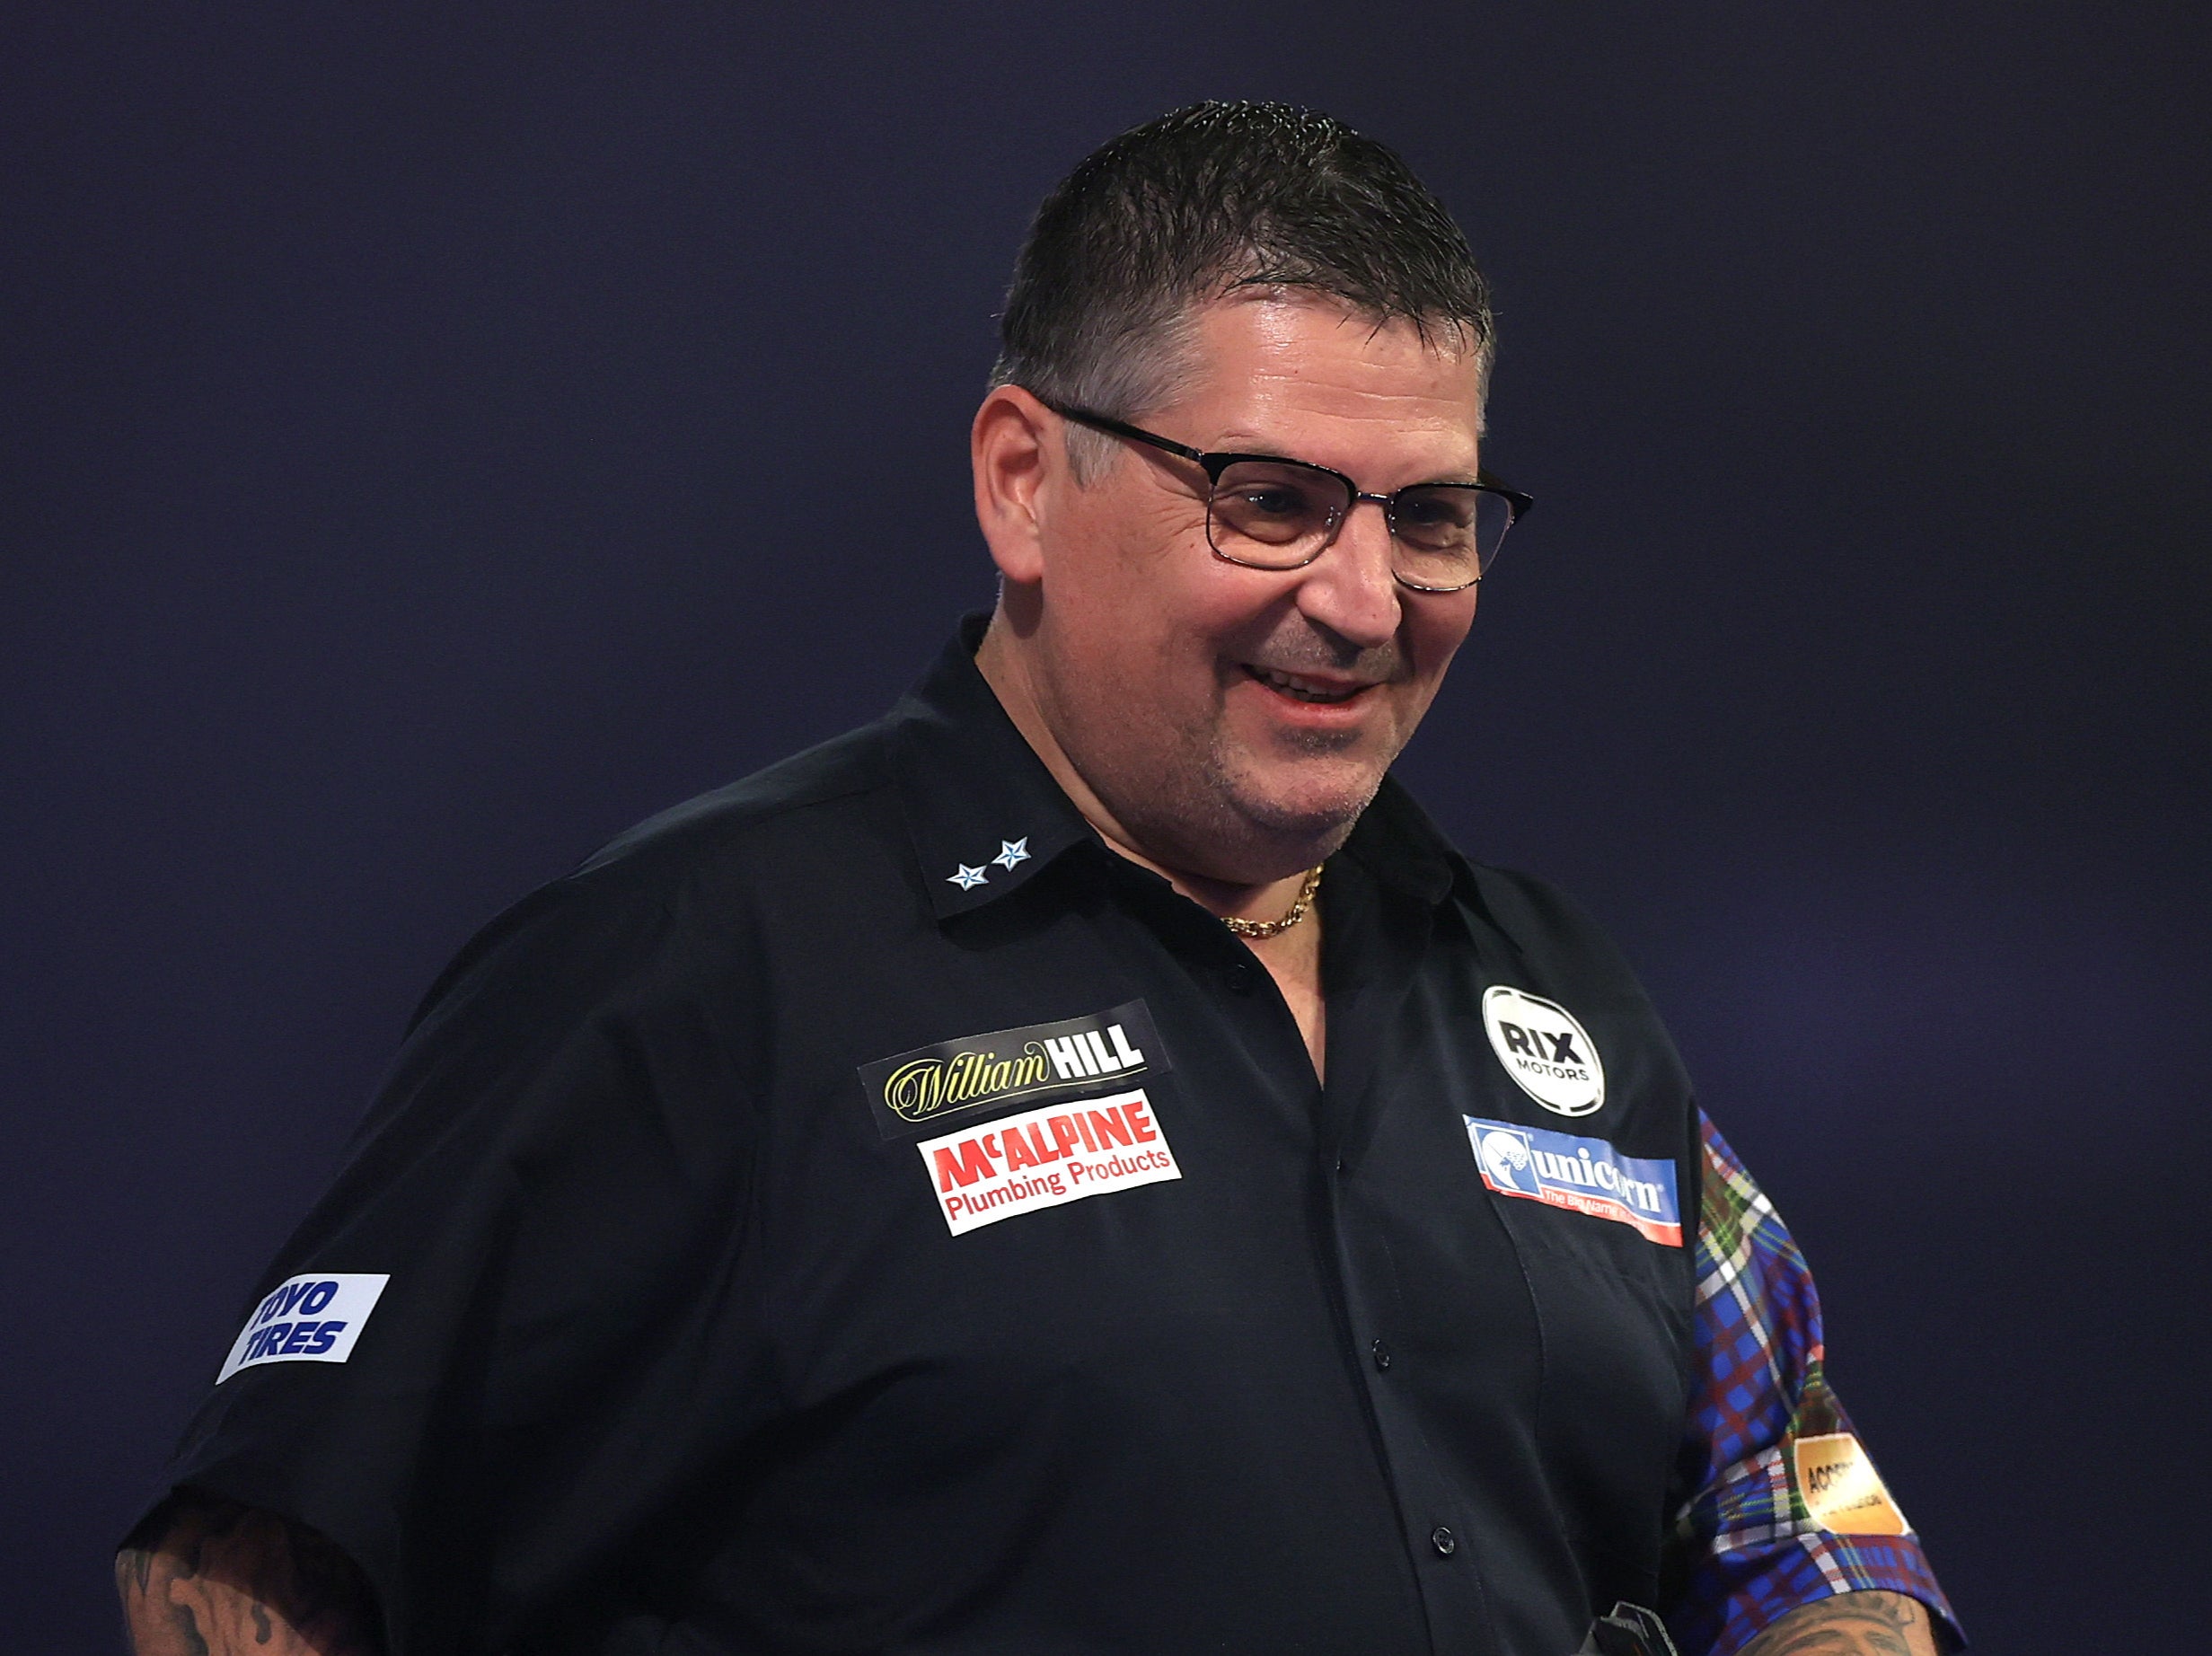 Two-time world champion Gary Anderson is into the quarter-finals